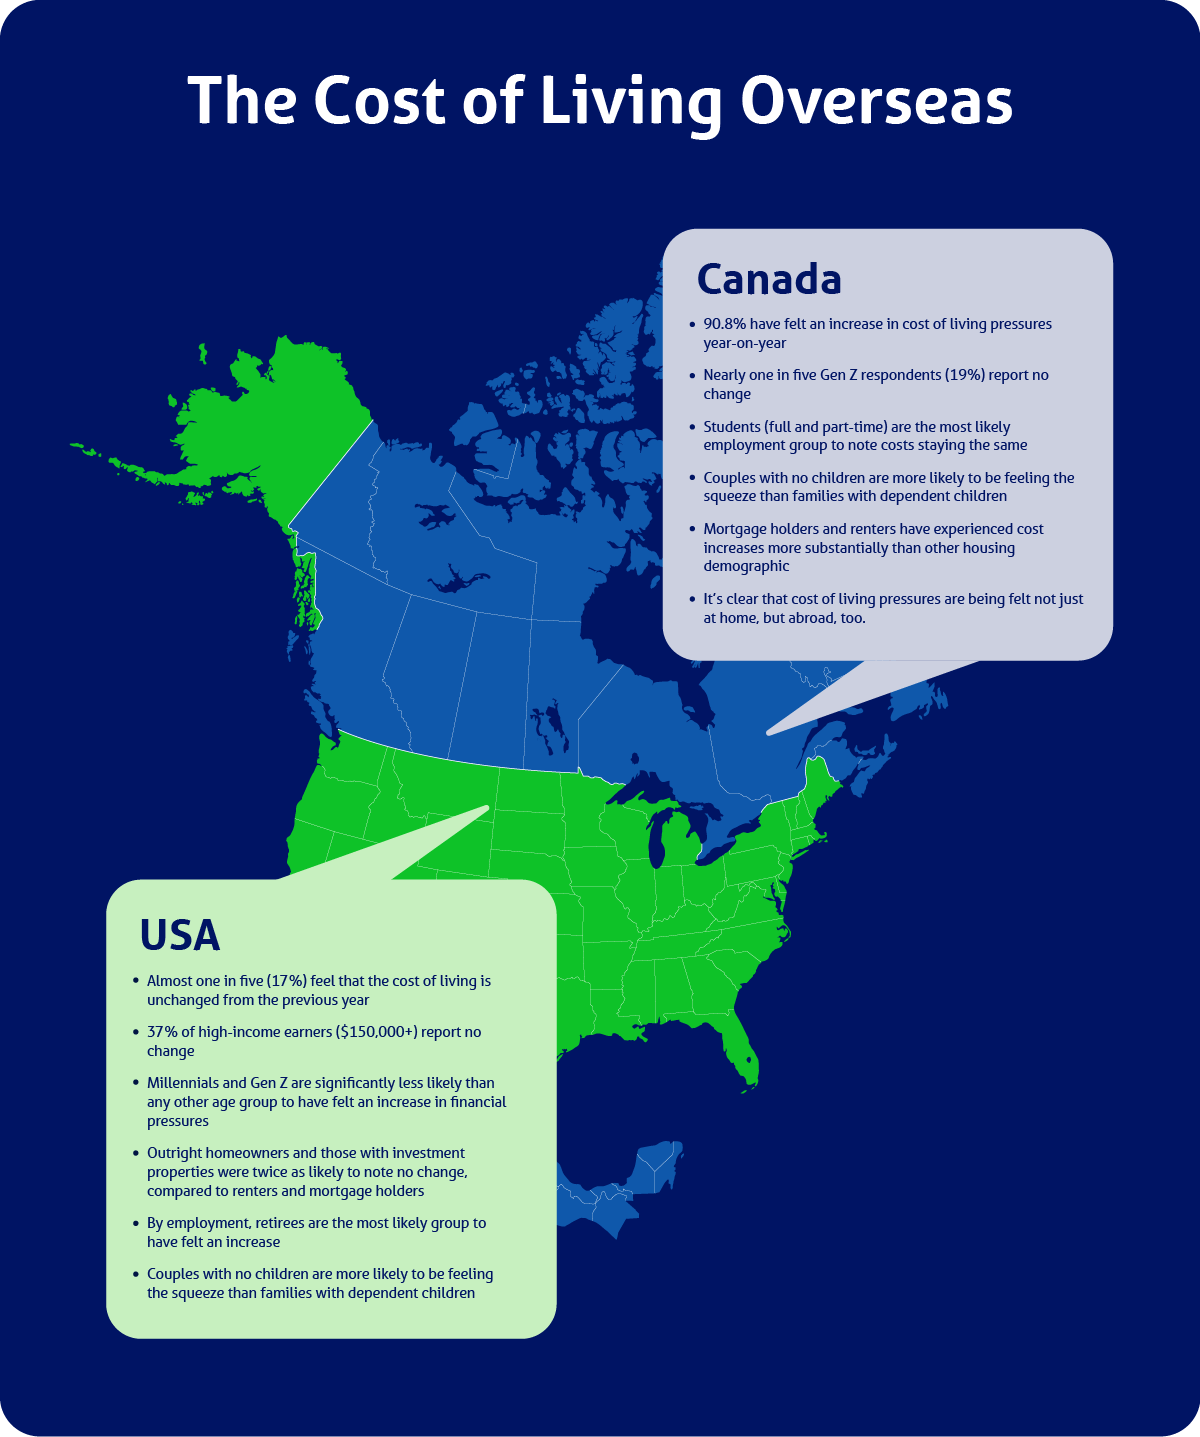 Map illustrating how the cost of living crisis is impacting America and Canada